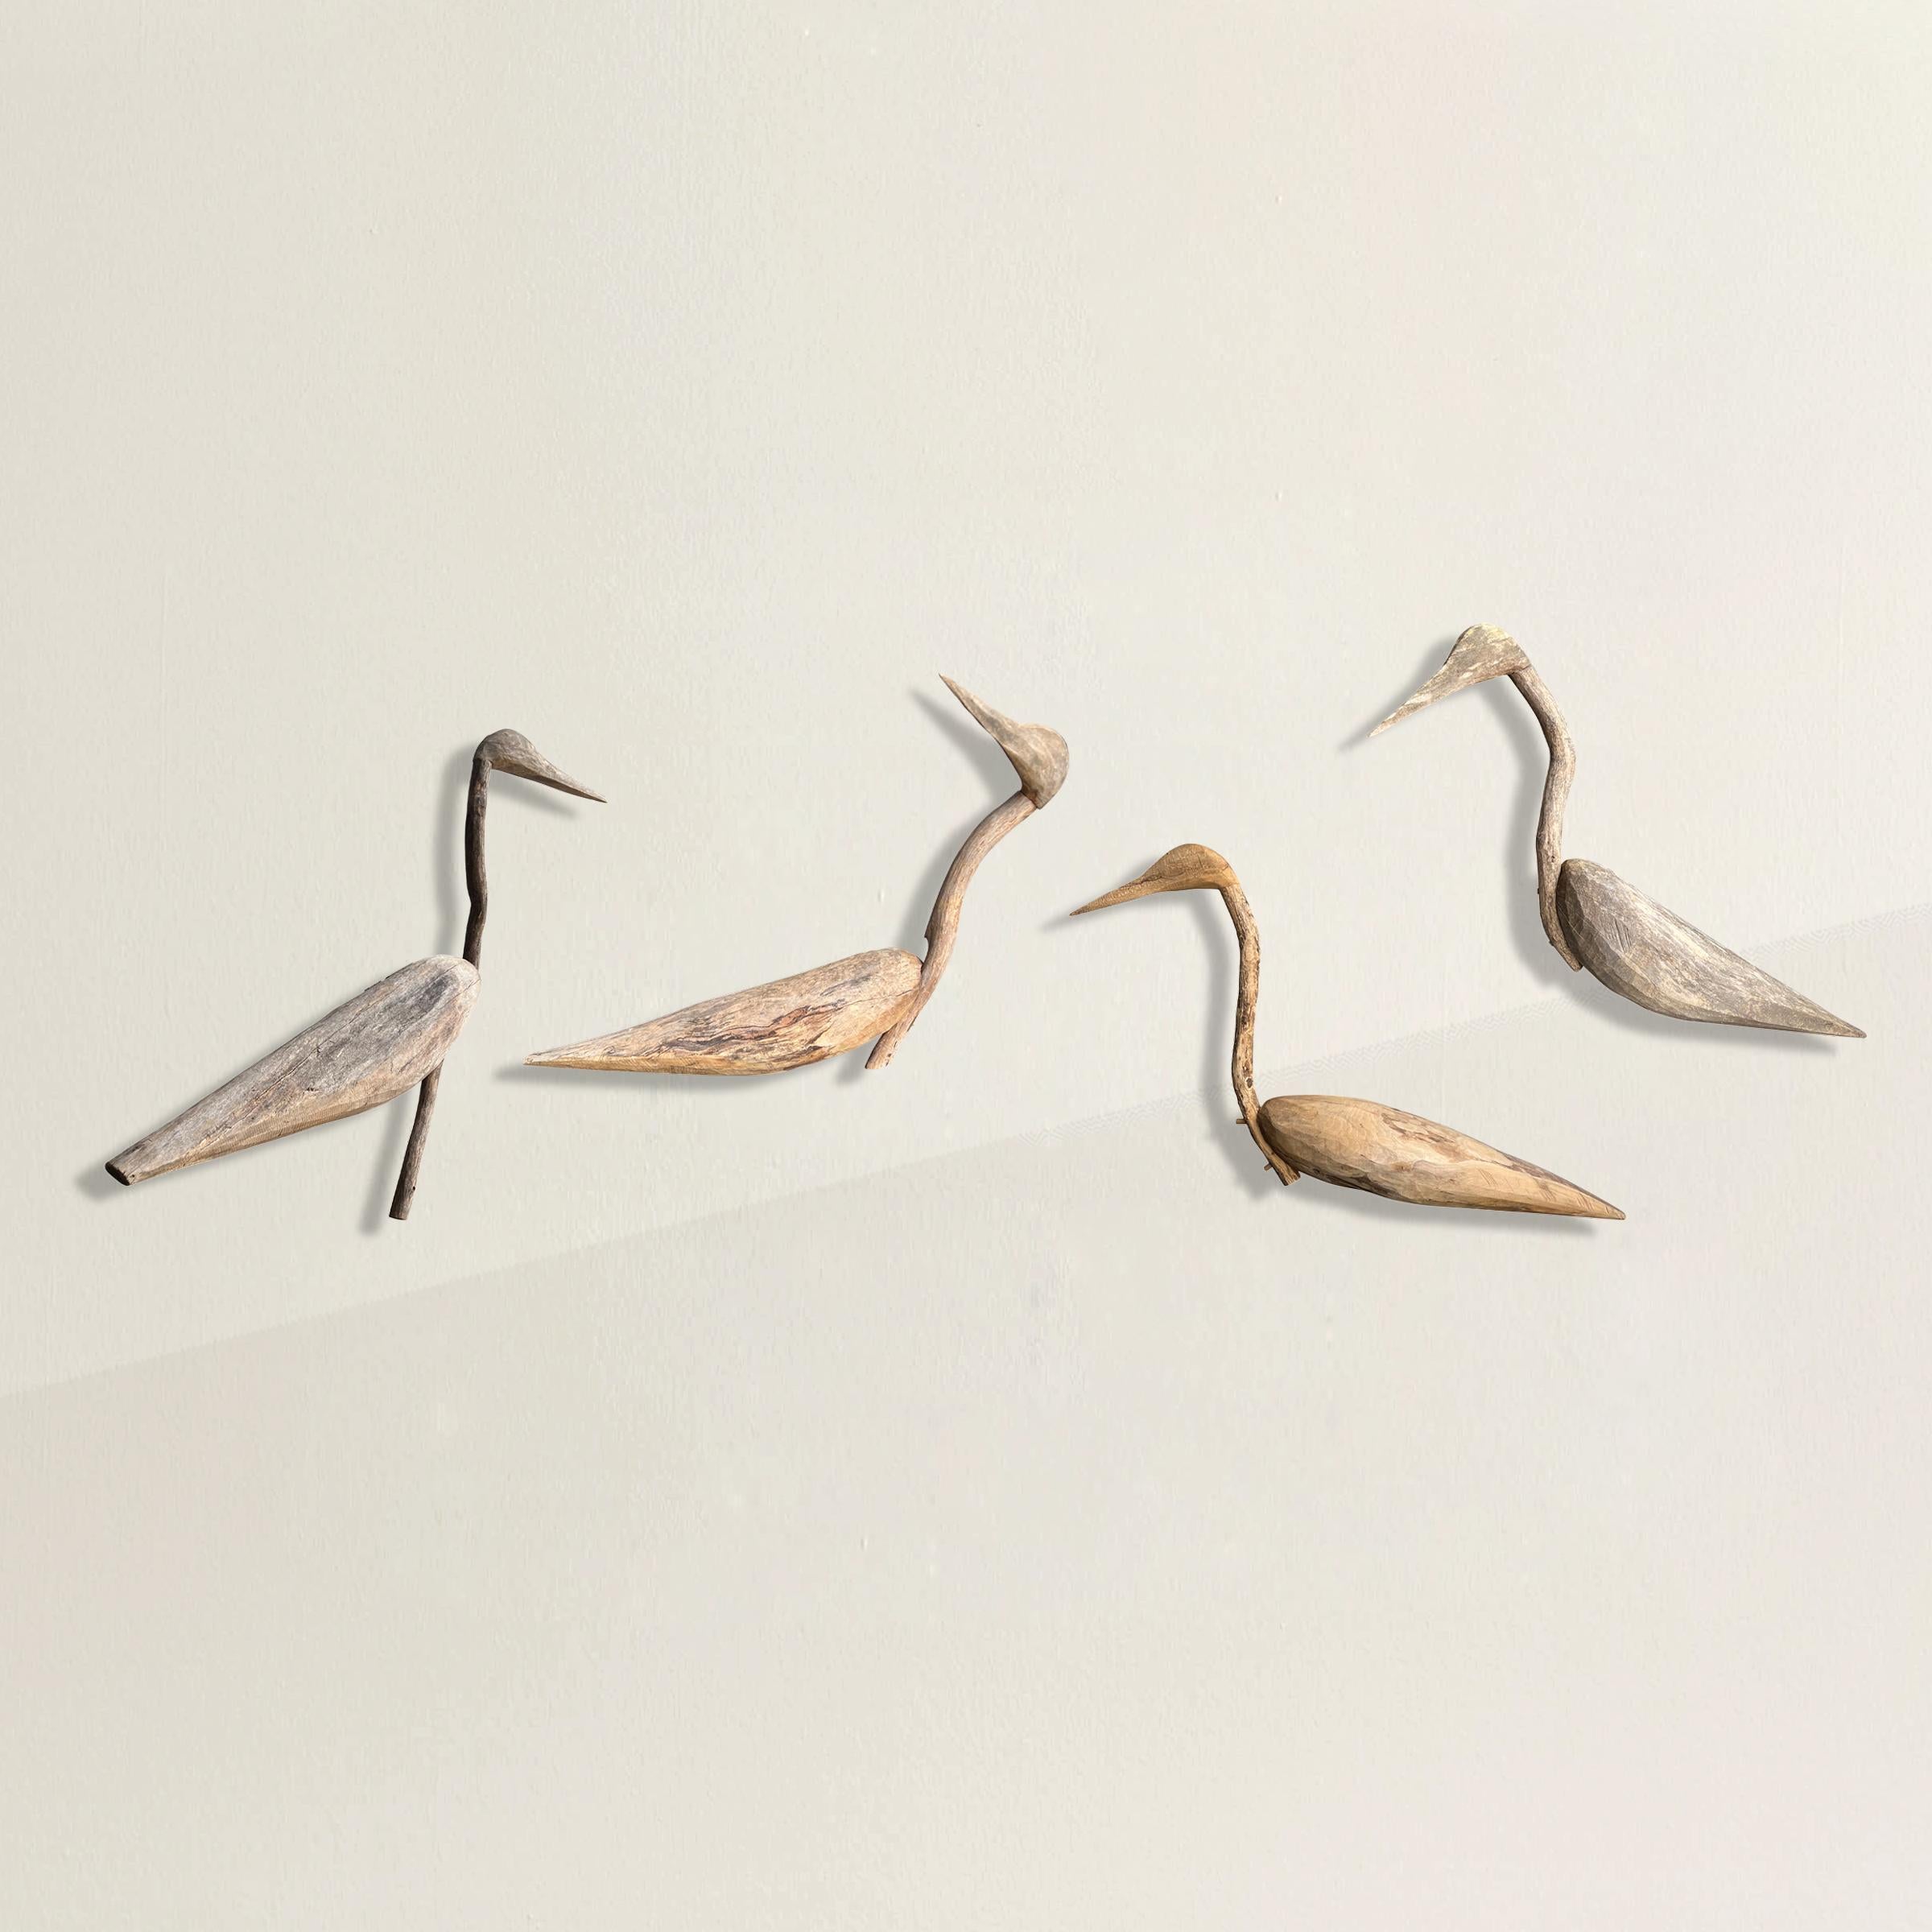 A spirited and playful set of four 20th century American Folk Art wood decoys each with hand carved bodies and heads supported by natural contorted branch necks that add instant individual personalities to each bird. We've had custom steel wall